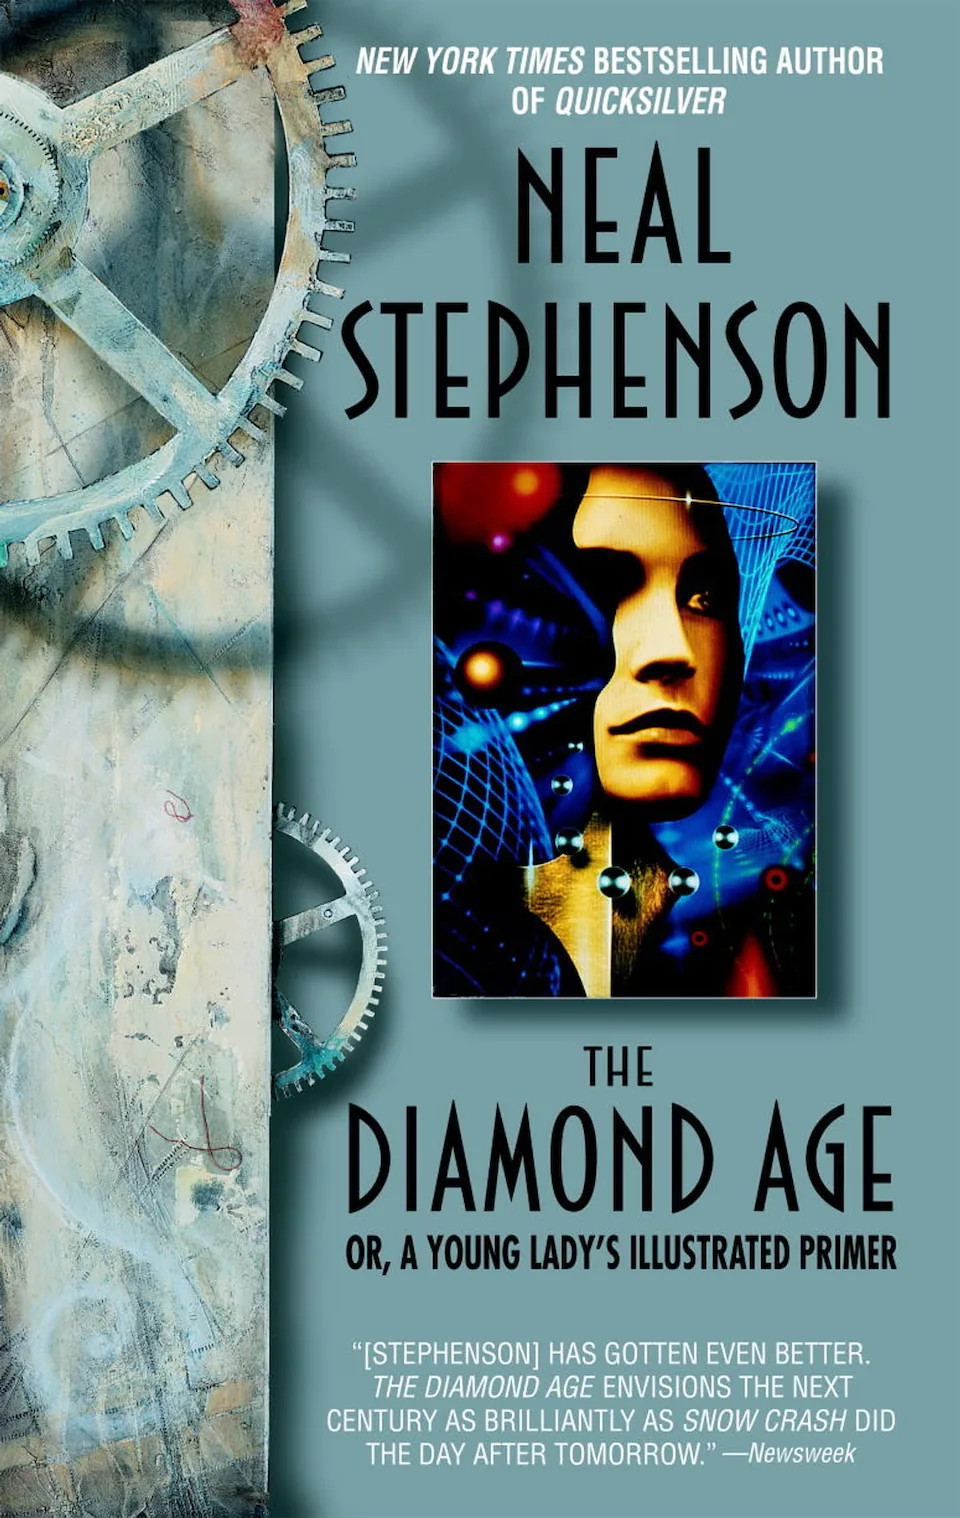 The Diamond Age: Or, A Young Lady's Illustrated Primer by Neal Stephenson finished on 2024 Jun 29